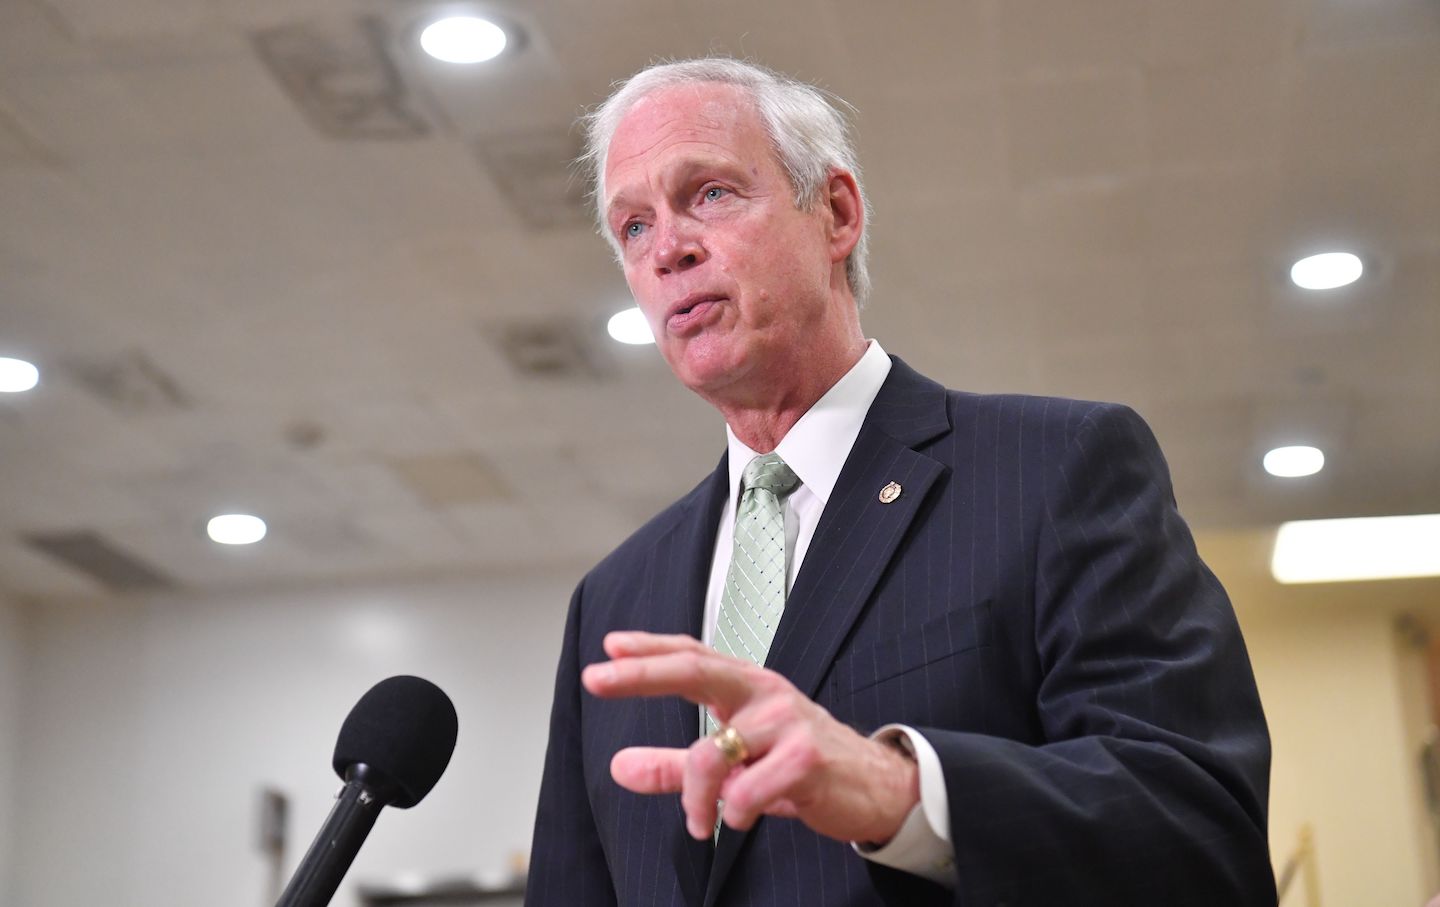 “Ron Johnson Doesn’t Give a Sh*t About Wisconsin Workers”